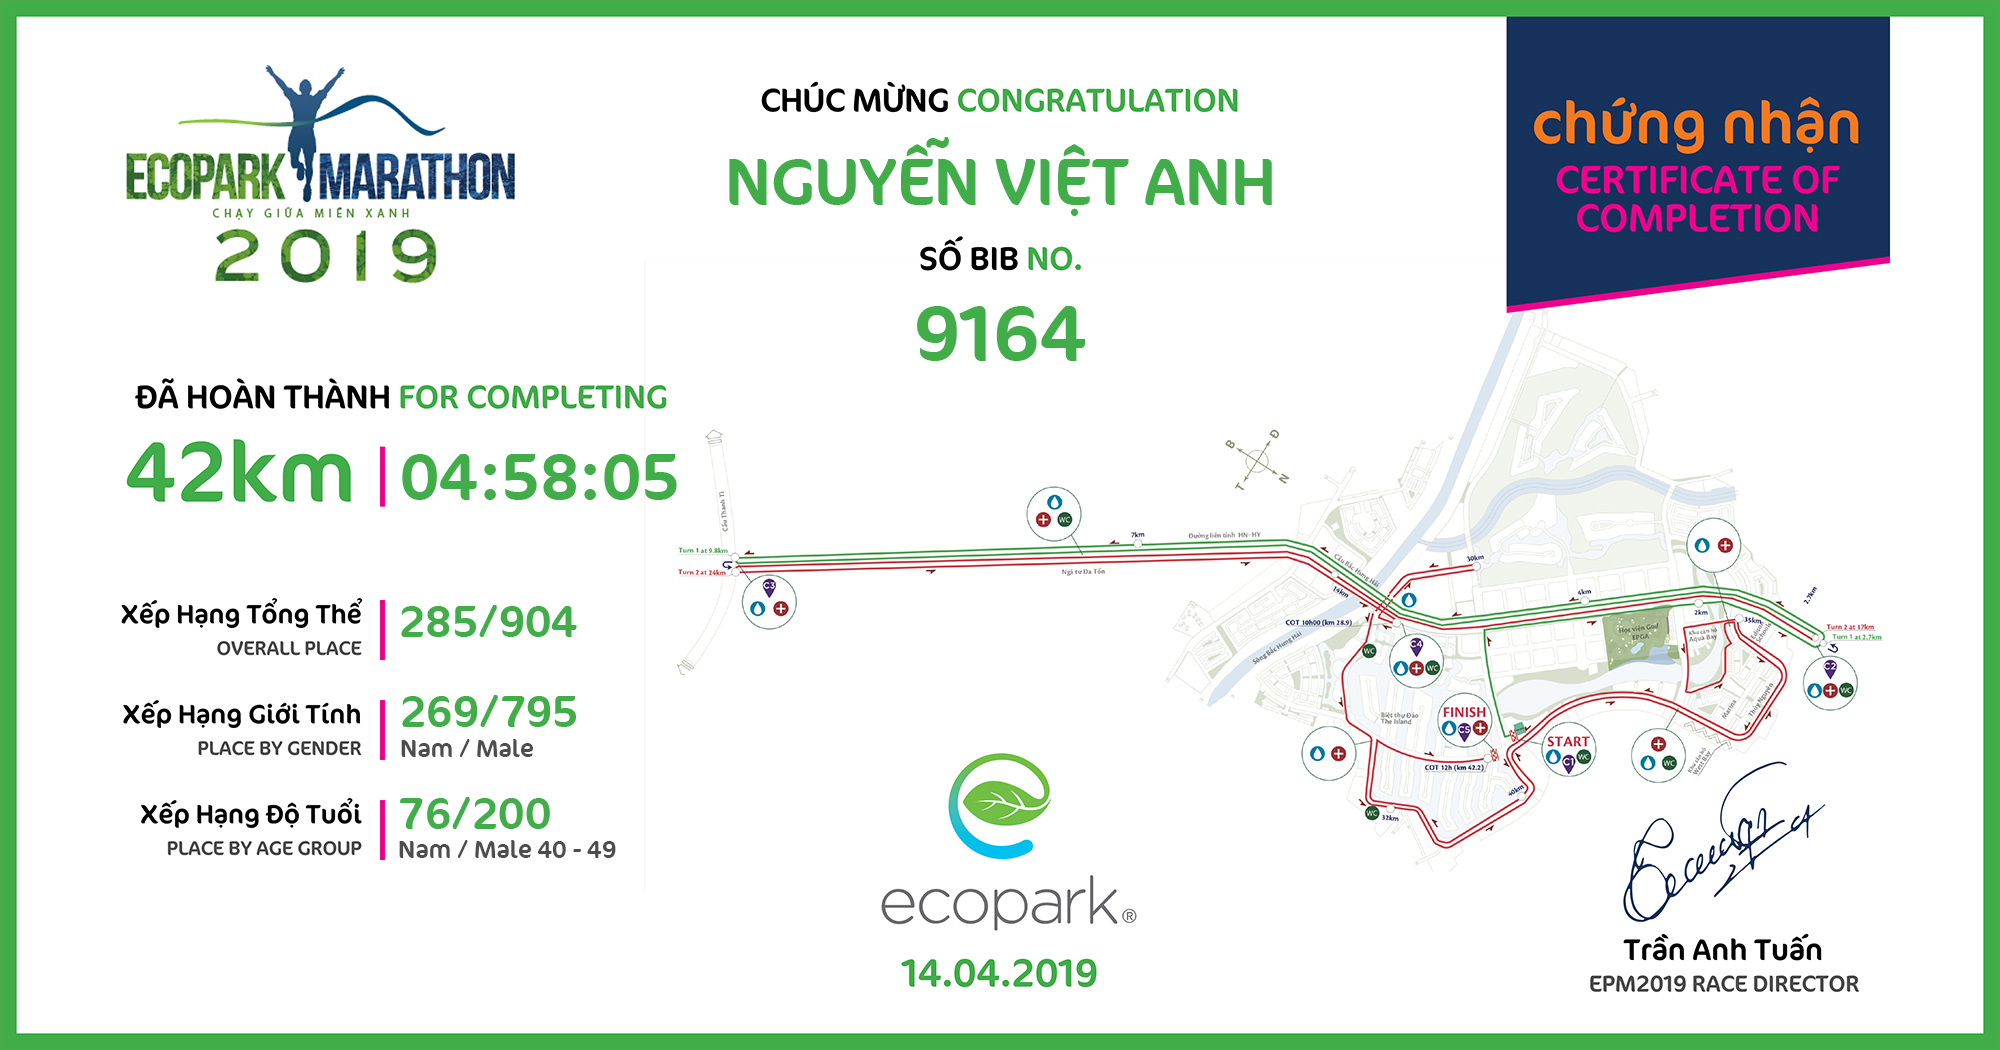 9164 - Nguyễn Việt Anh